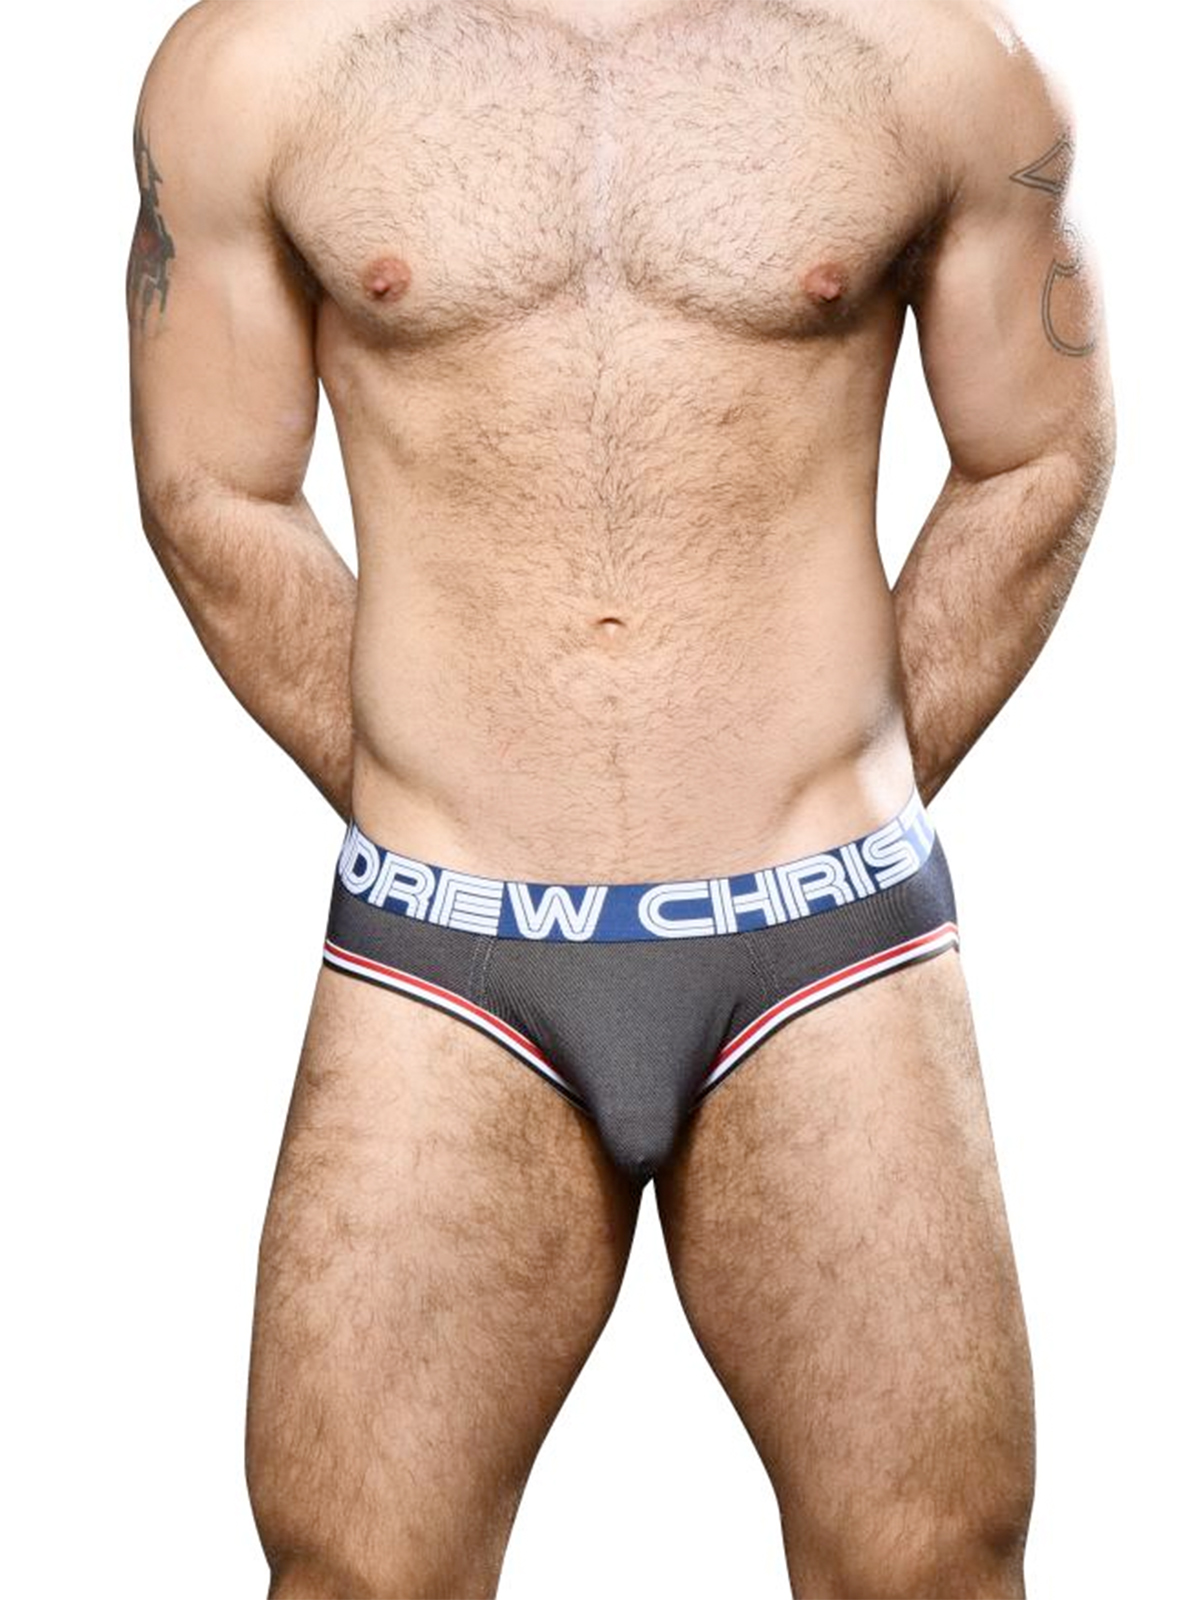 Andrew Christian Denim Brief w/ Almost Naked